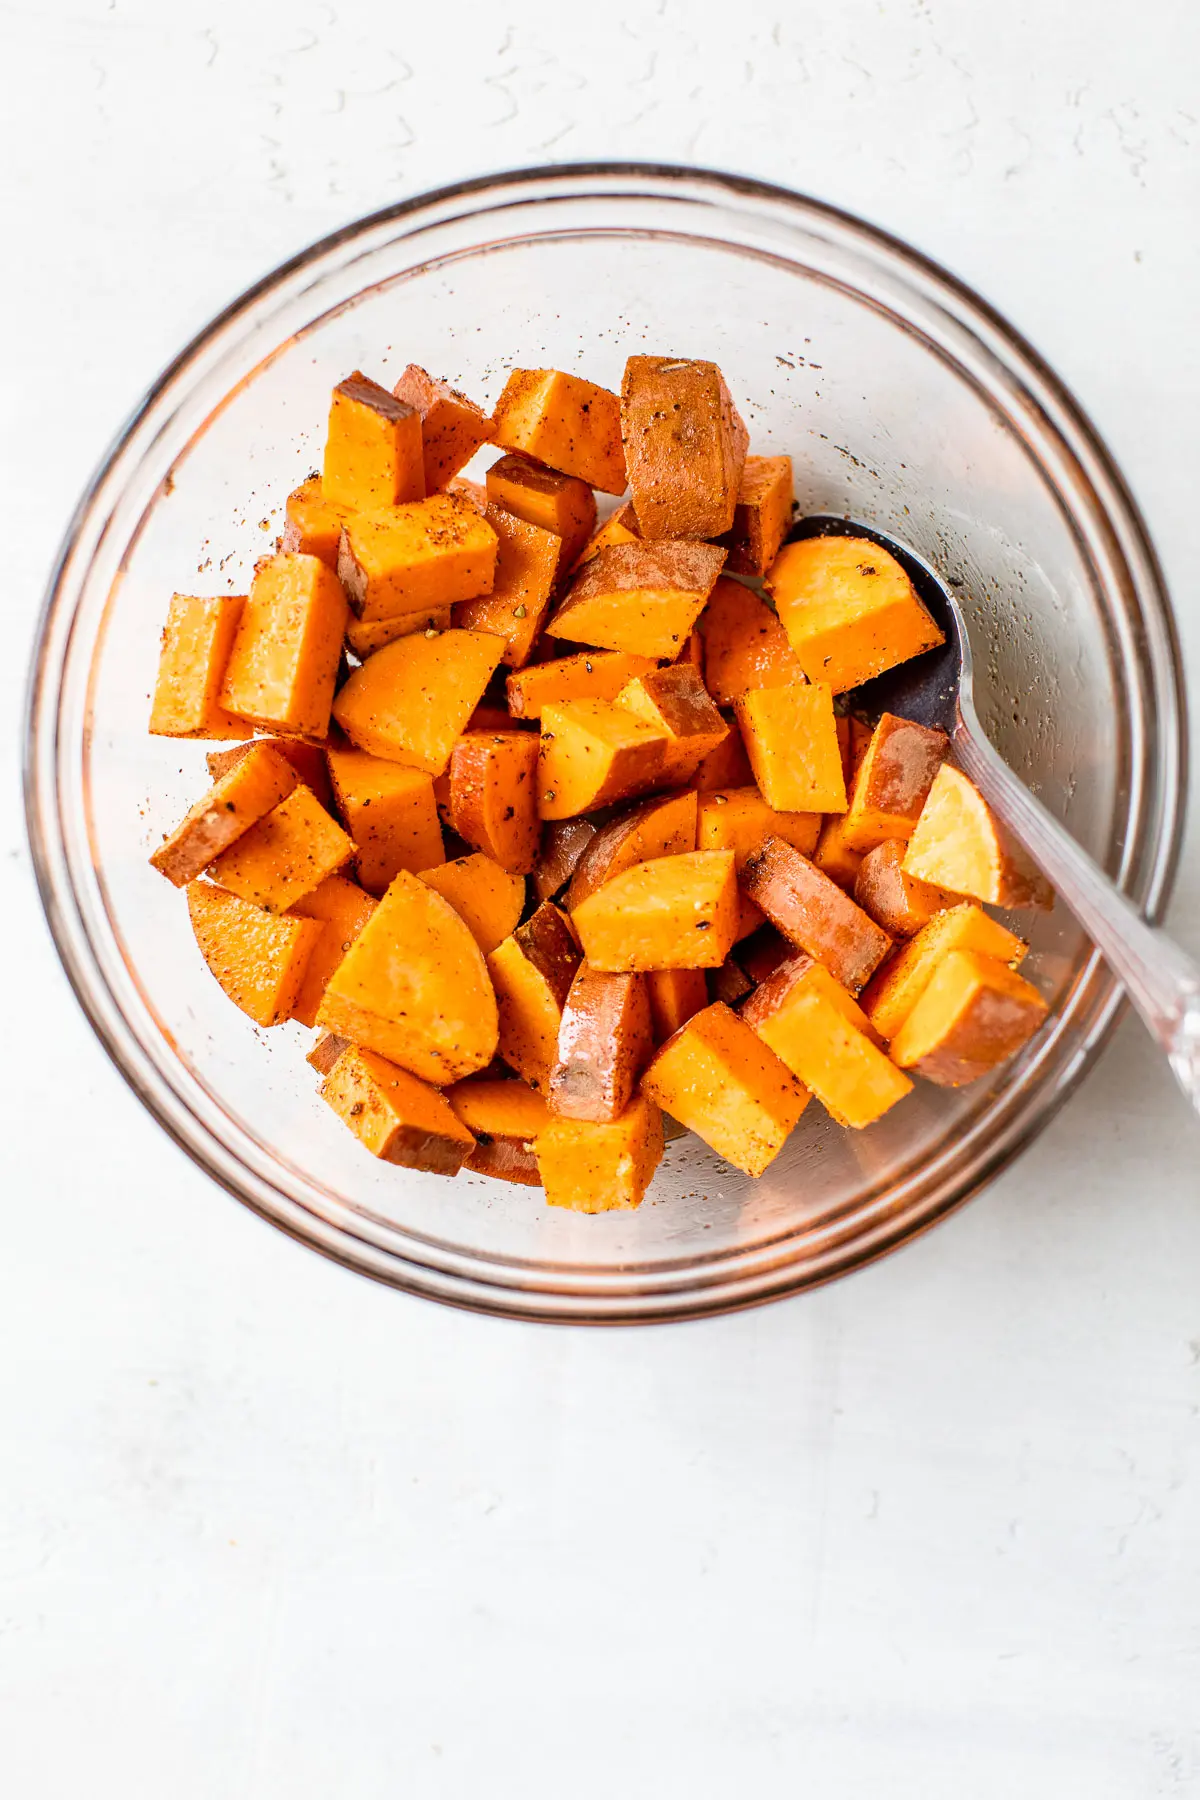 diced sweet potatoes in a glass bowl